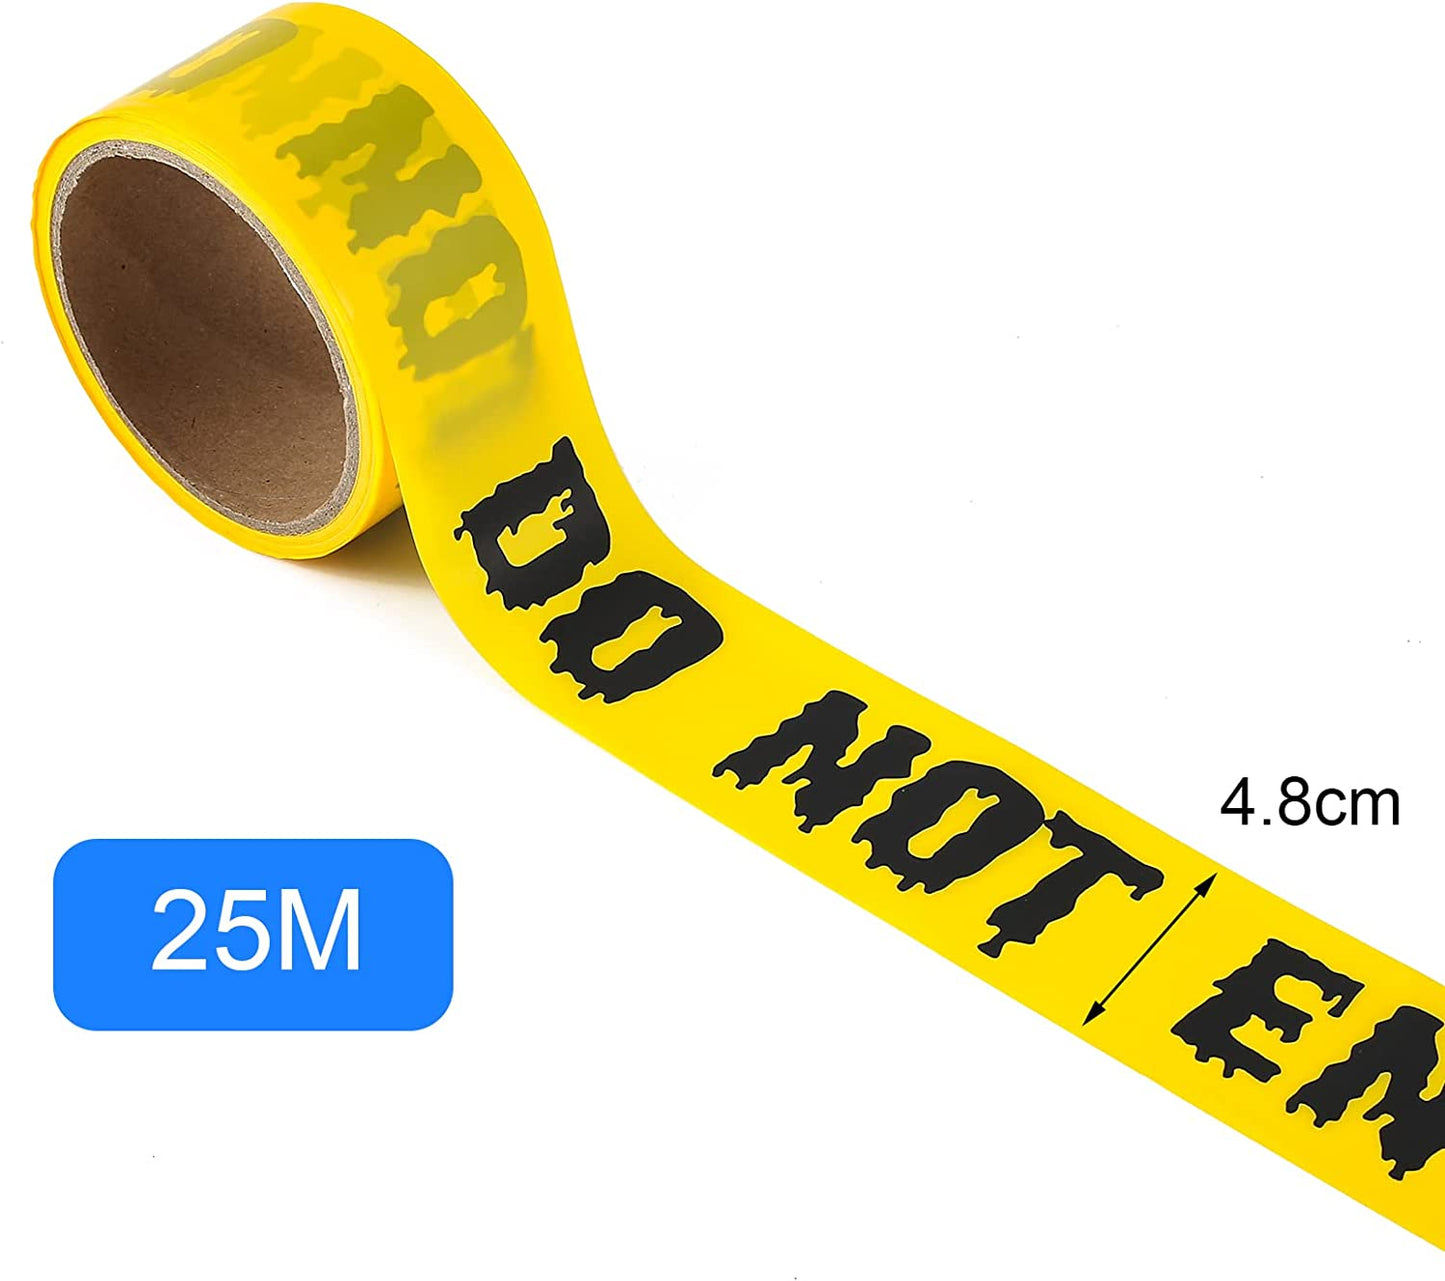 Halloween Caution Tapes, Halloween Hazard Warning Barrier Tape Halloween Zombie Caution Tape, Halloween Props Fright Tape Bundle for Zombie Party or Halloween Party Decorations(25Mx4.8Cm) (Style B)